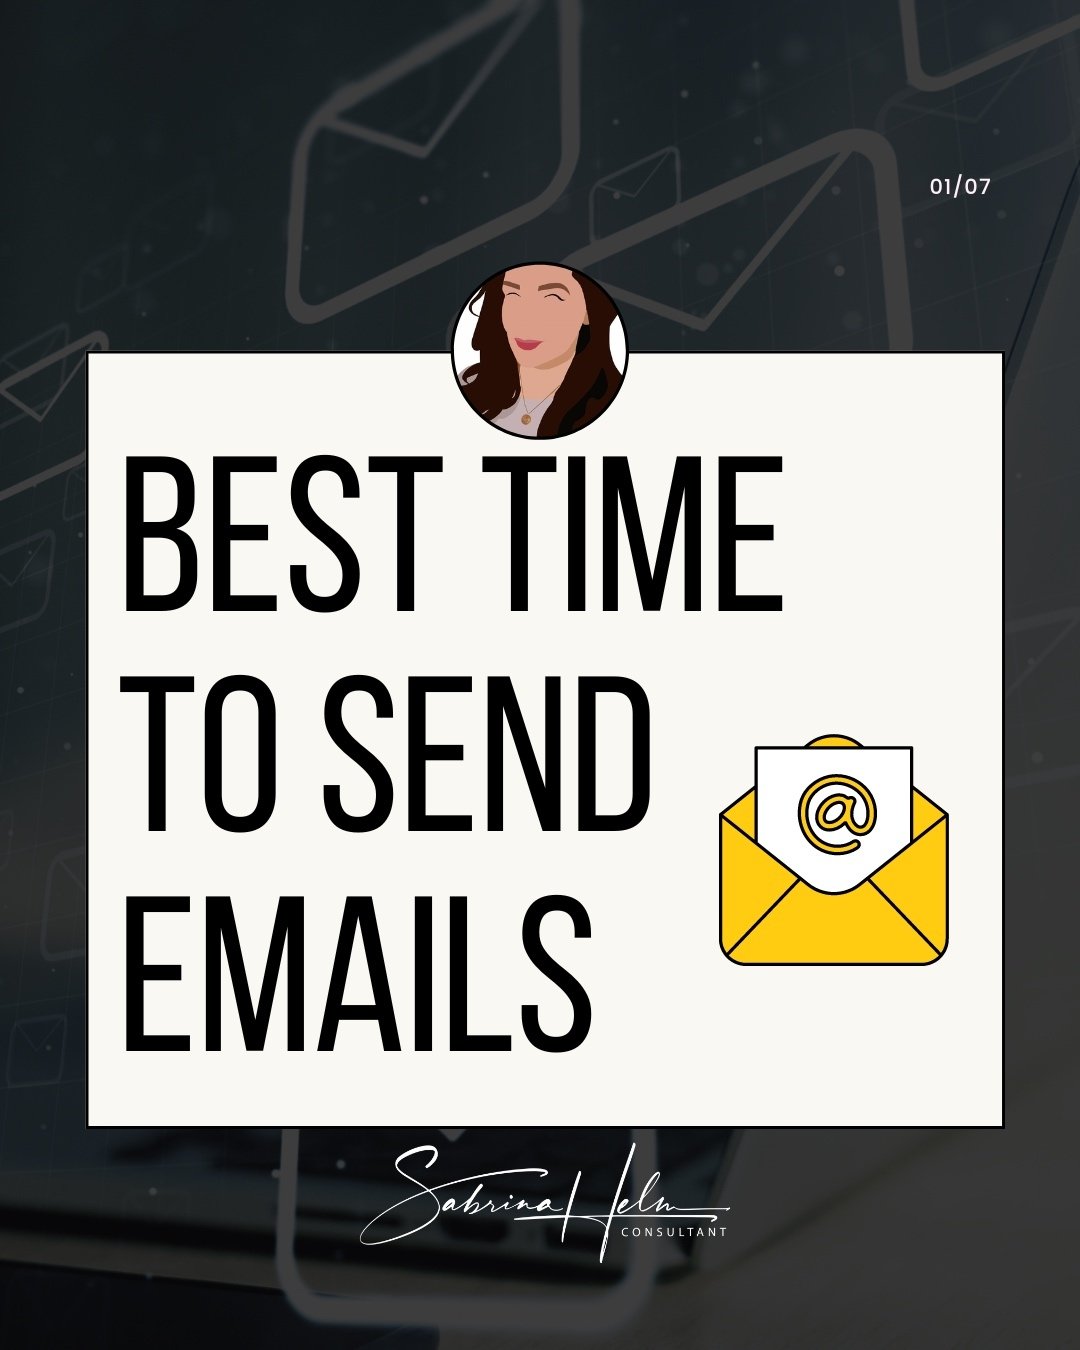 📧 Emails are the backbone of most communication strategies. It's also where a good chunk of donations are collected for organizations, non-profits, and candidates. 

⏰ So when is the best time to send your email? Swipe for the best times so your ema